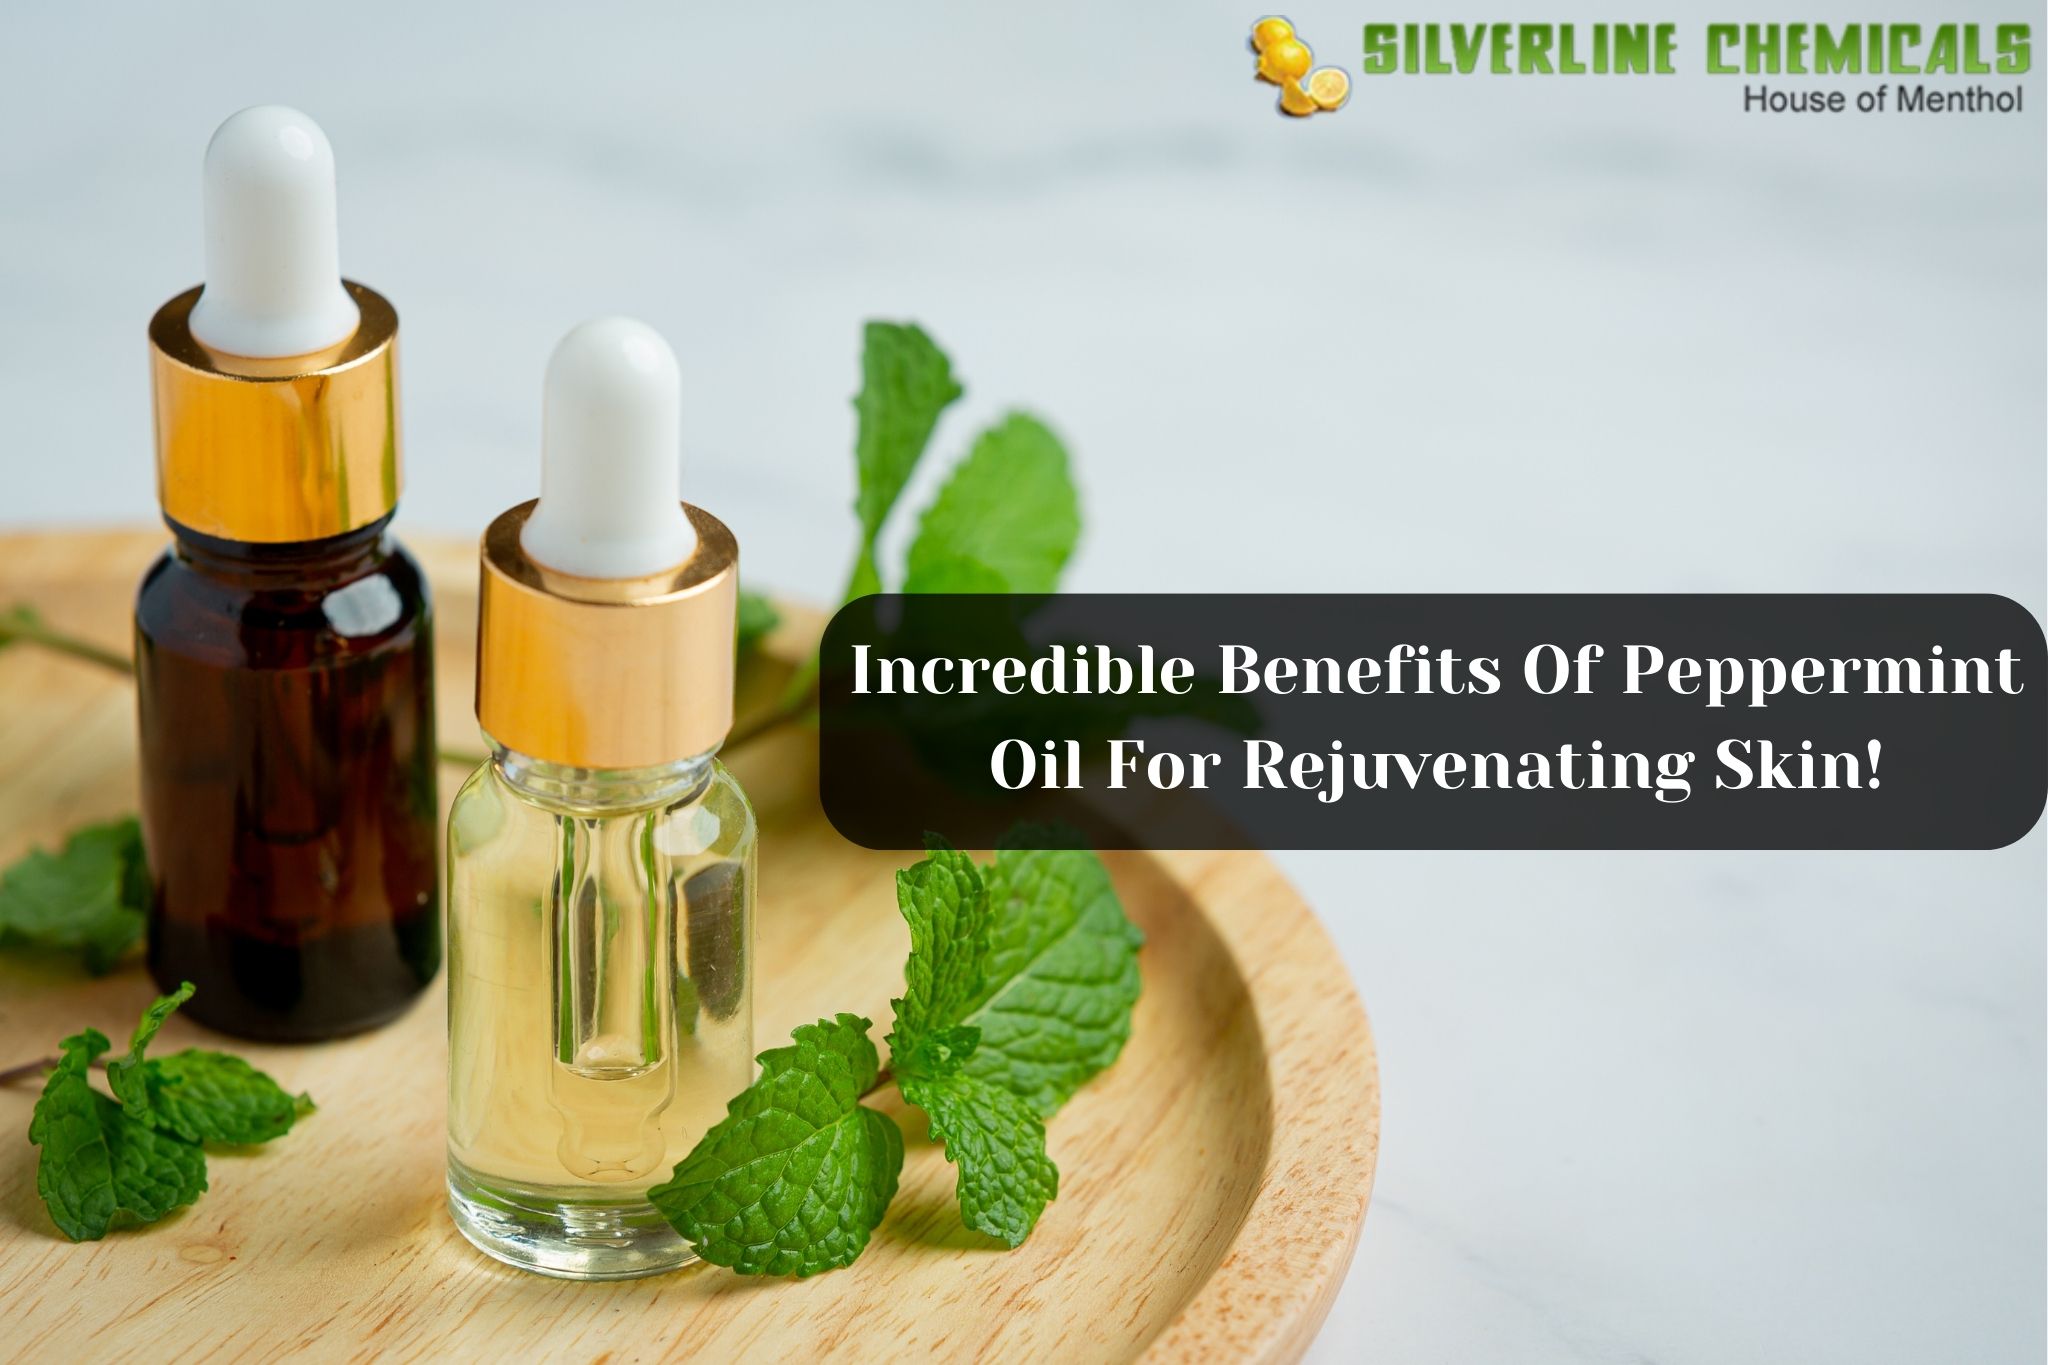 Incredible Benefits Of Peppermint Oil For Rejuvenating Skin!